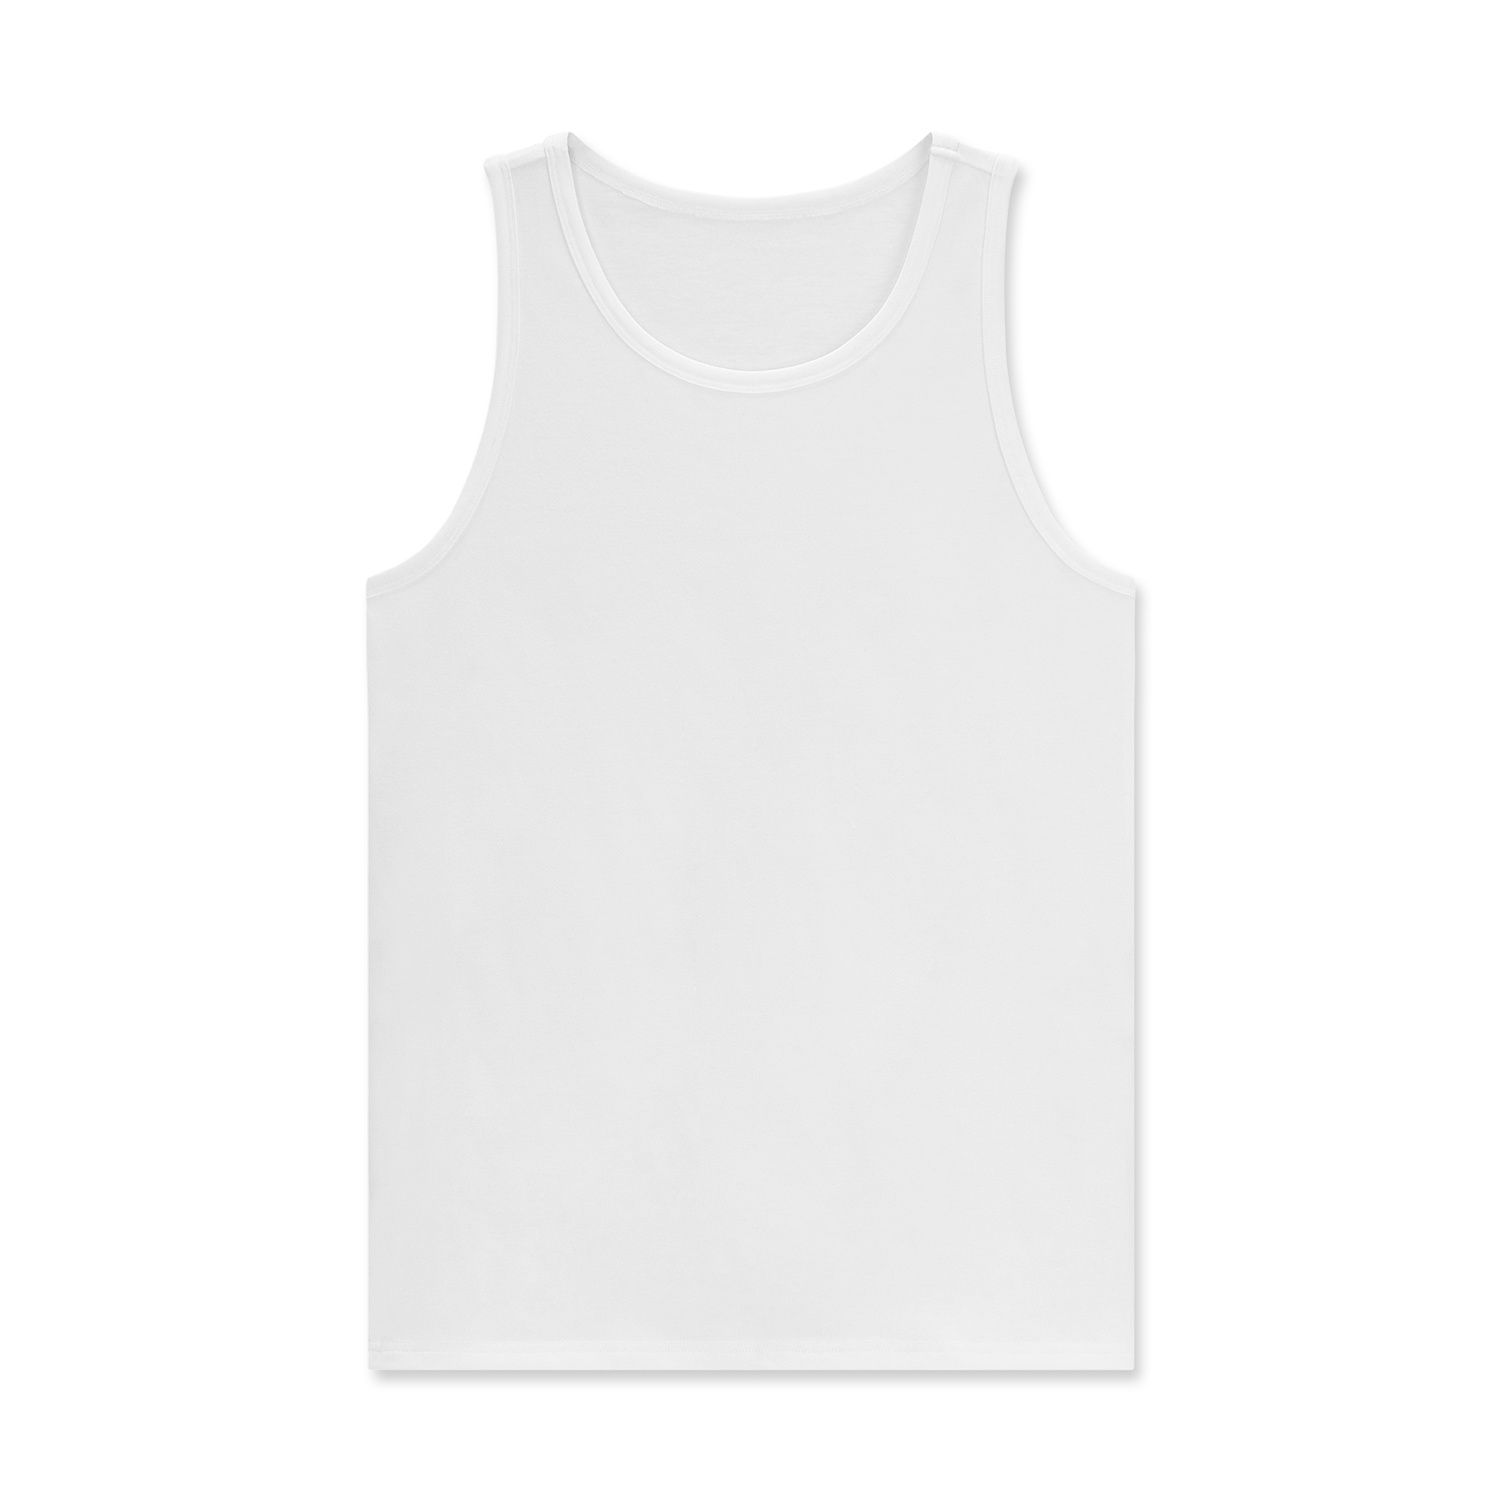 All-Over Print Unisex Muscle Tank Top | HugePOD